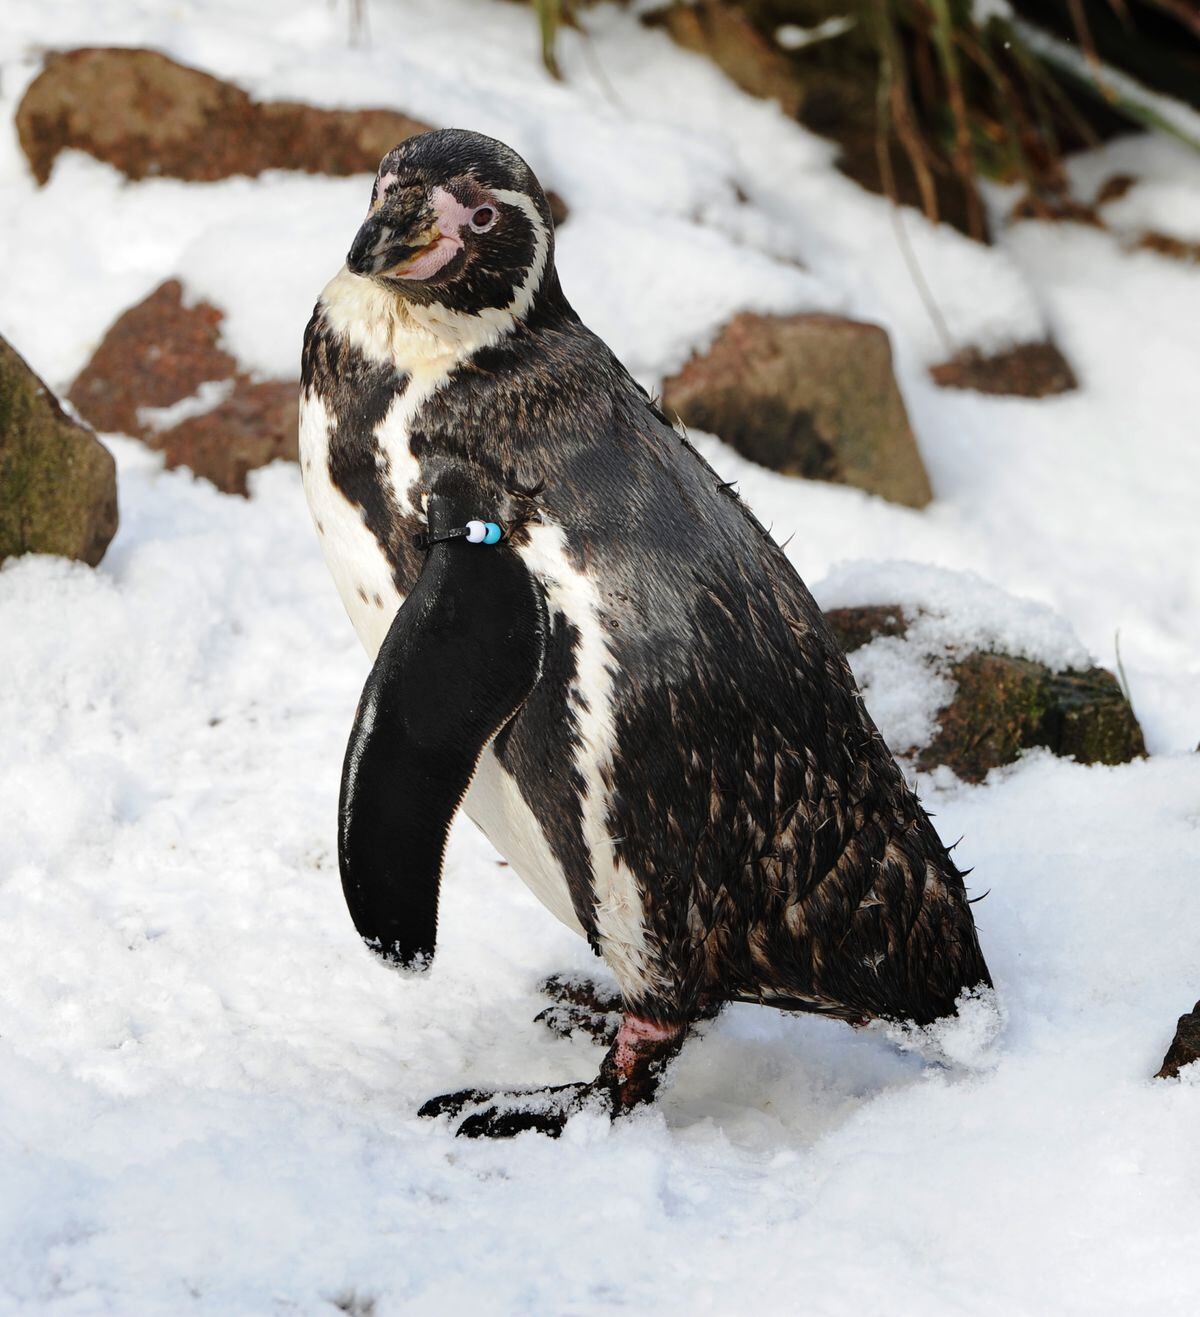 Many of the zoo's 69 penguins have died from the outbreak